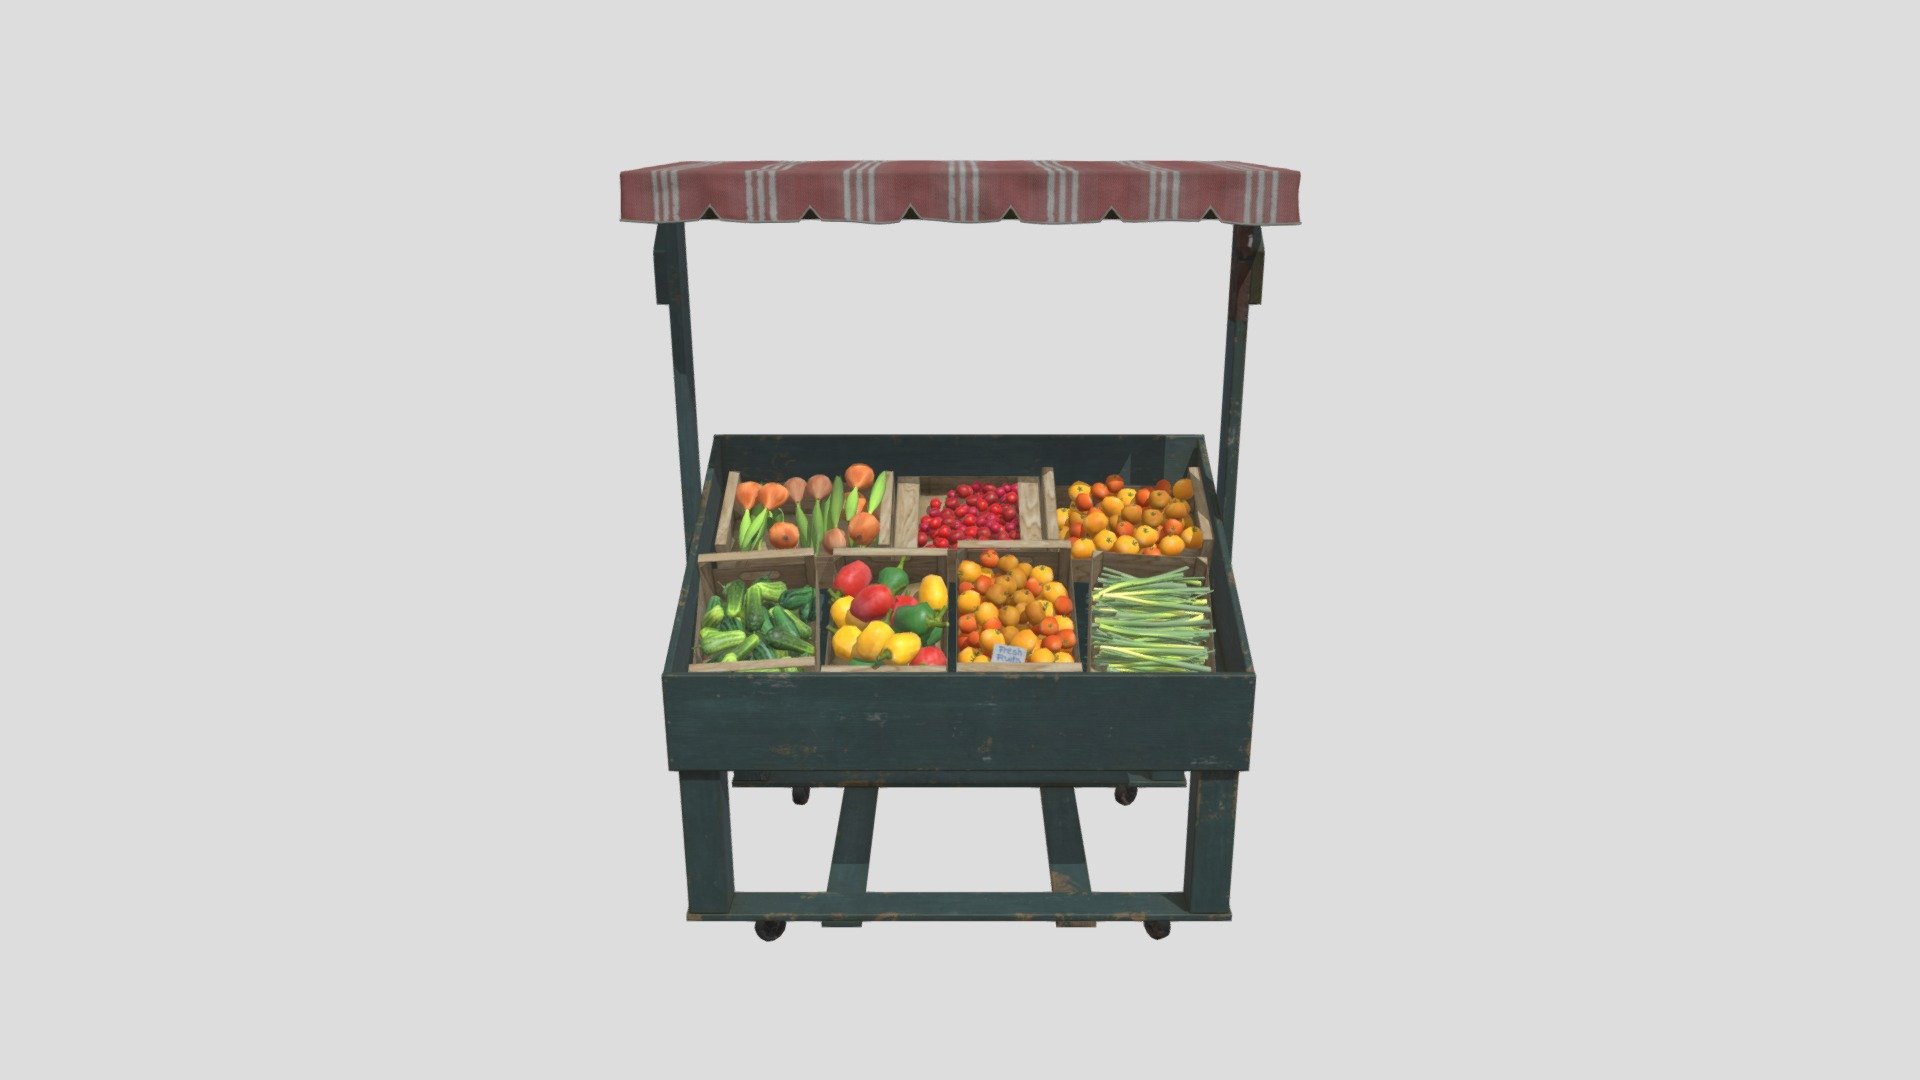 Professional, high quality 3d model of&nbsp;market stall ready to use in your visualizations with textures and materials included 3d model